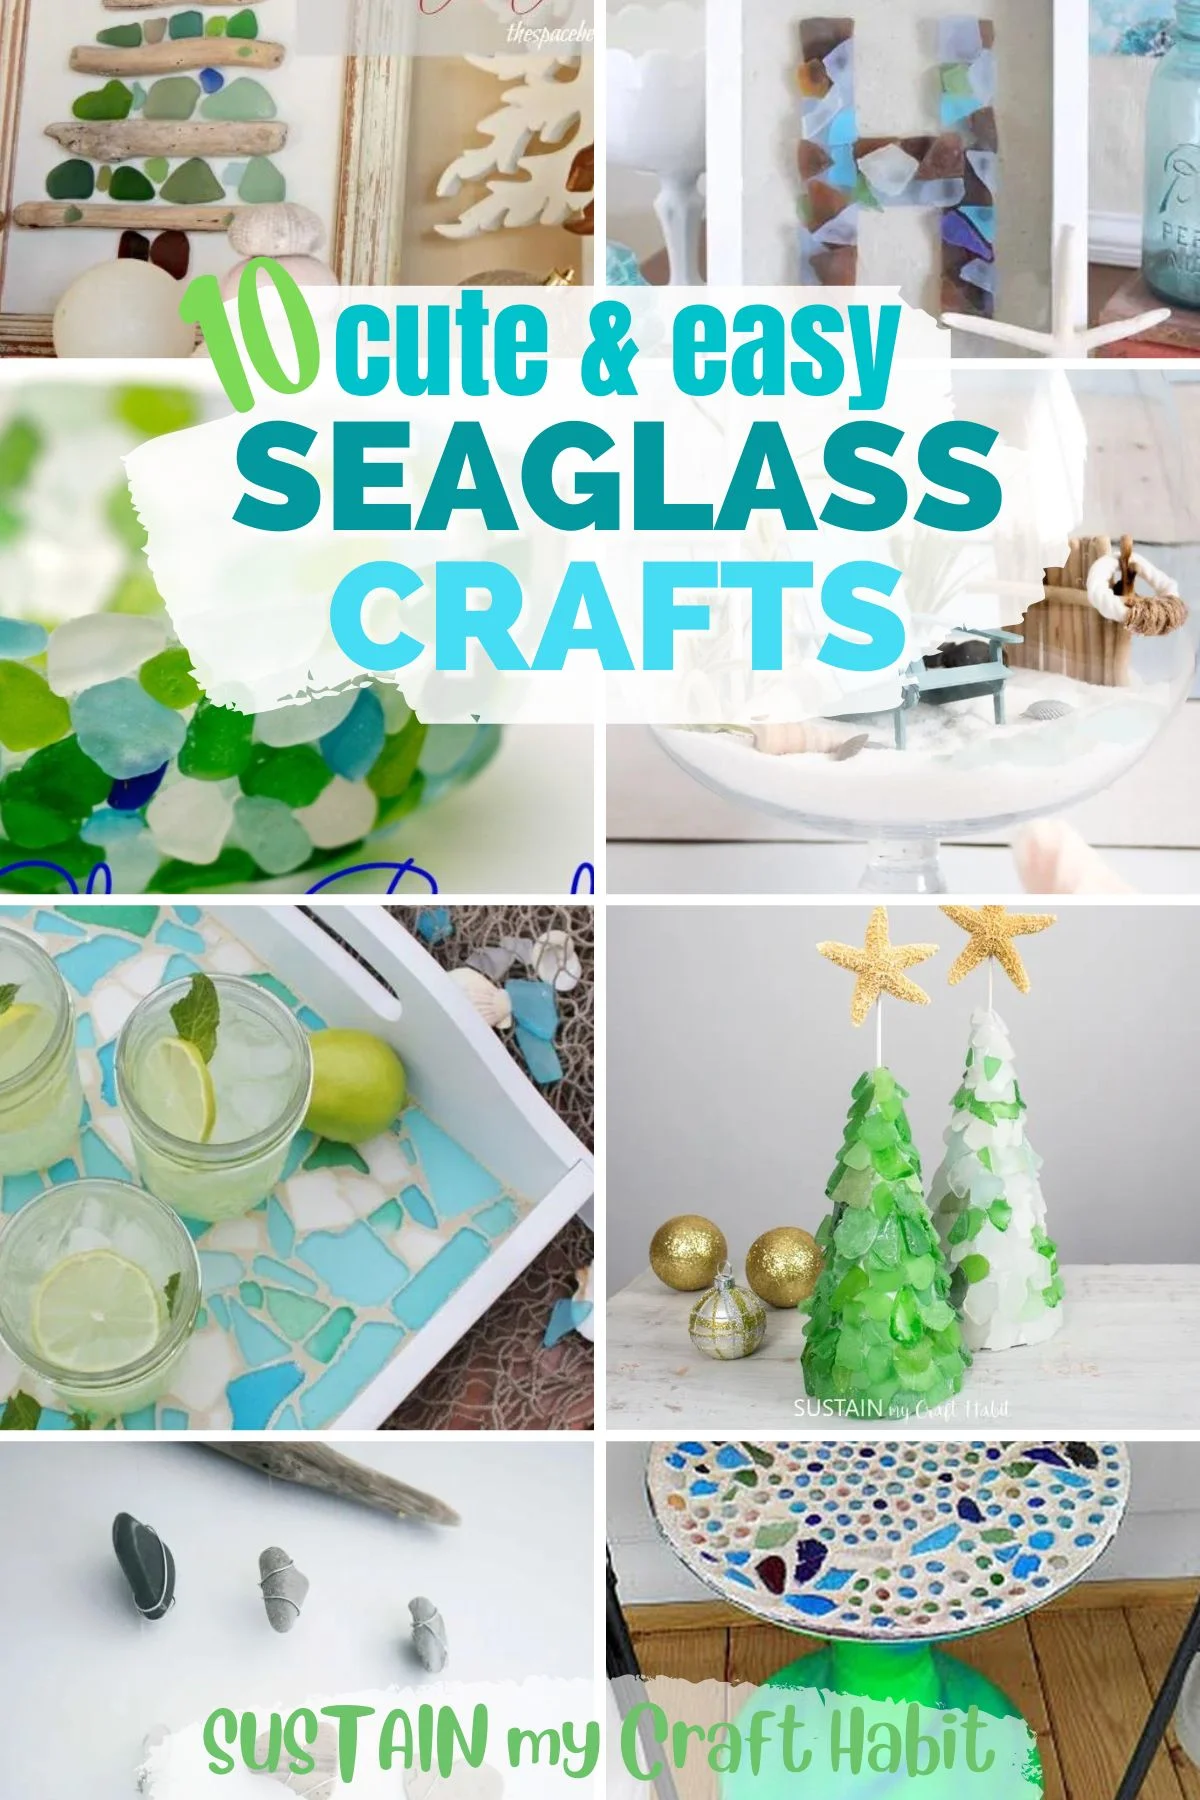 Collage of images showing several seaglass crafts to make.